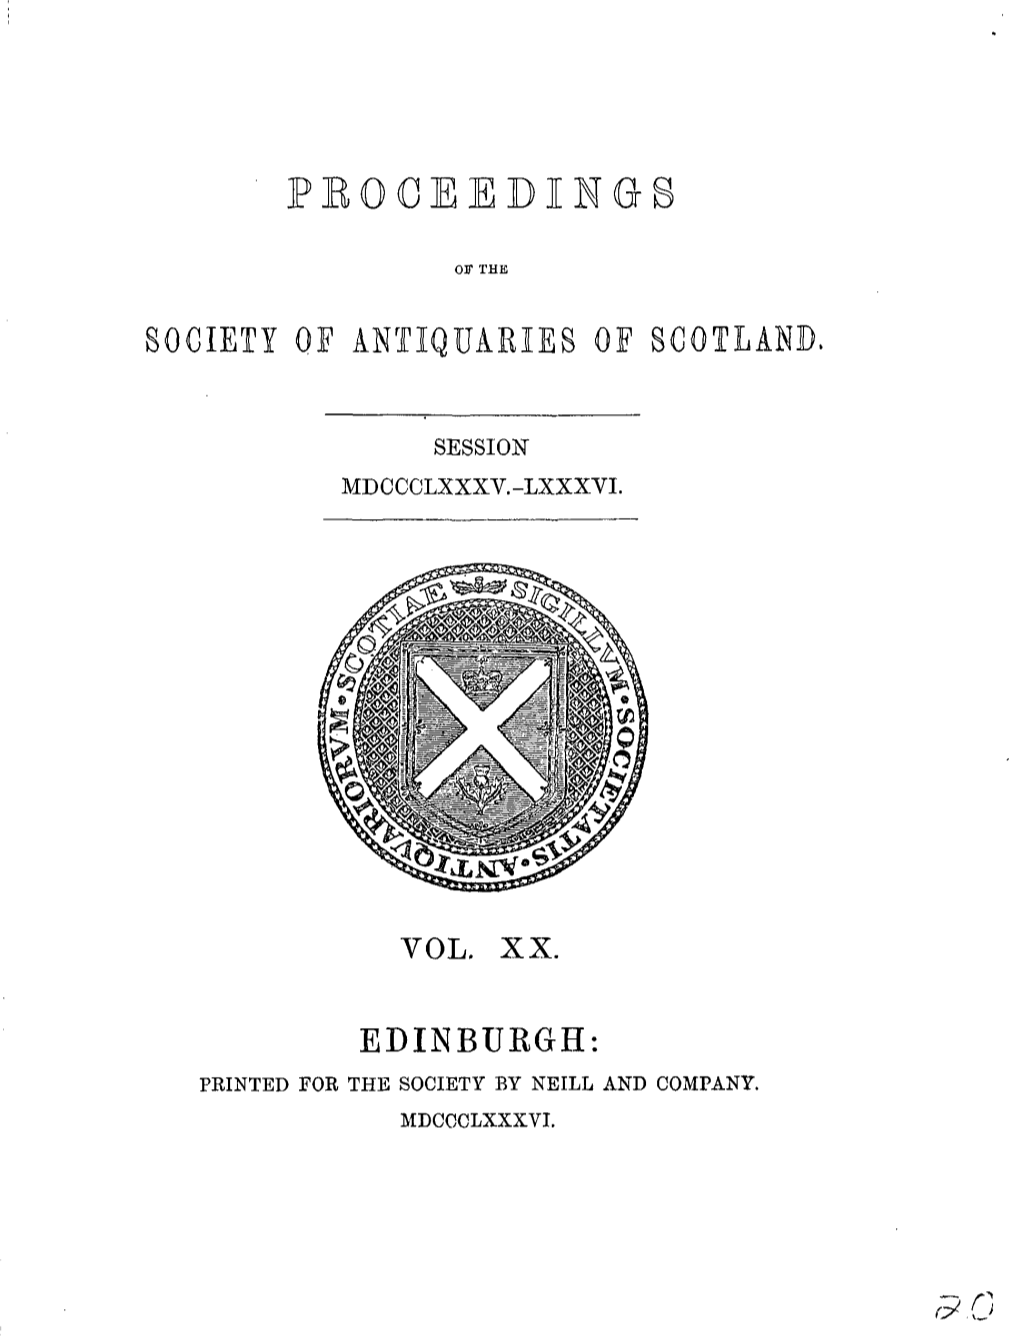 Edinburgh: Printed for the Society by Neill and Company